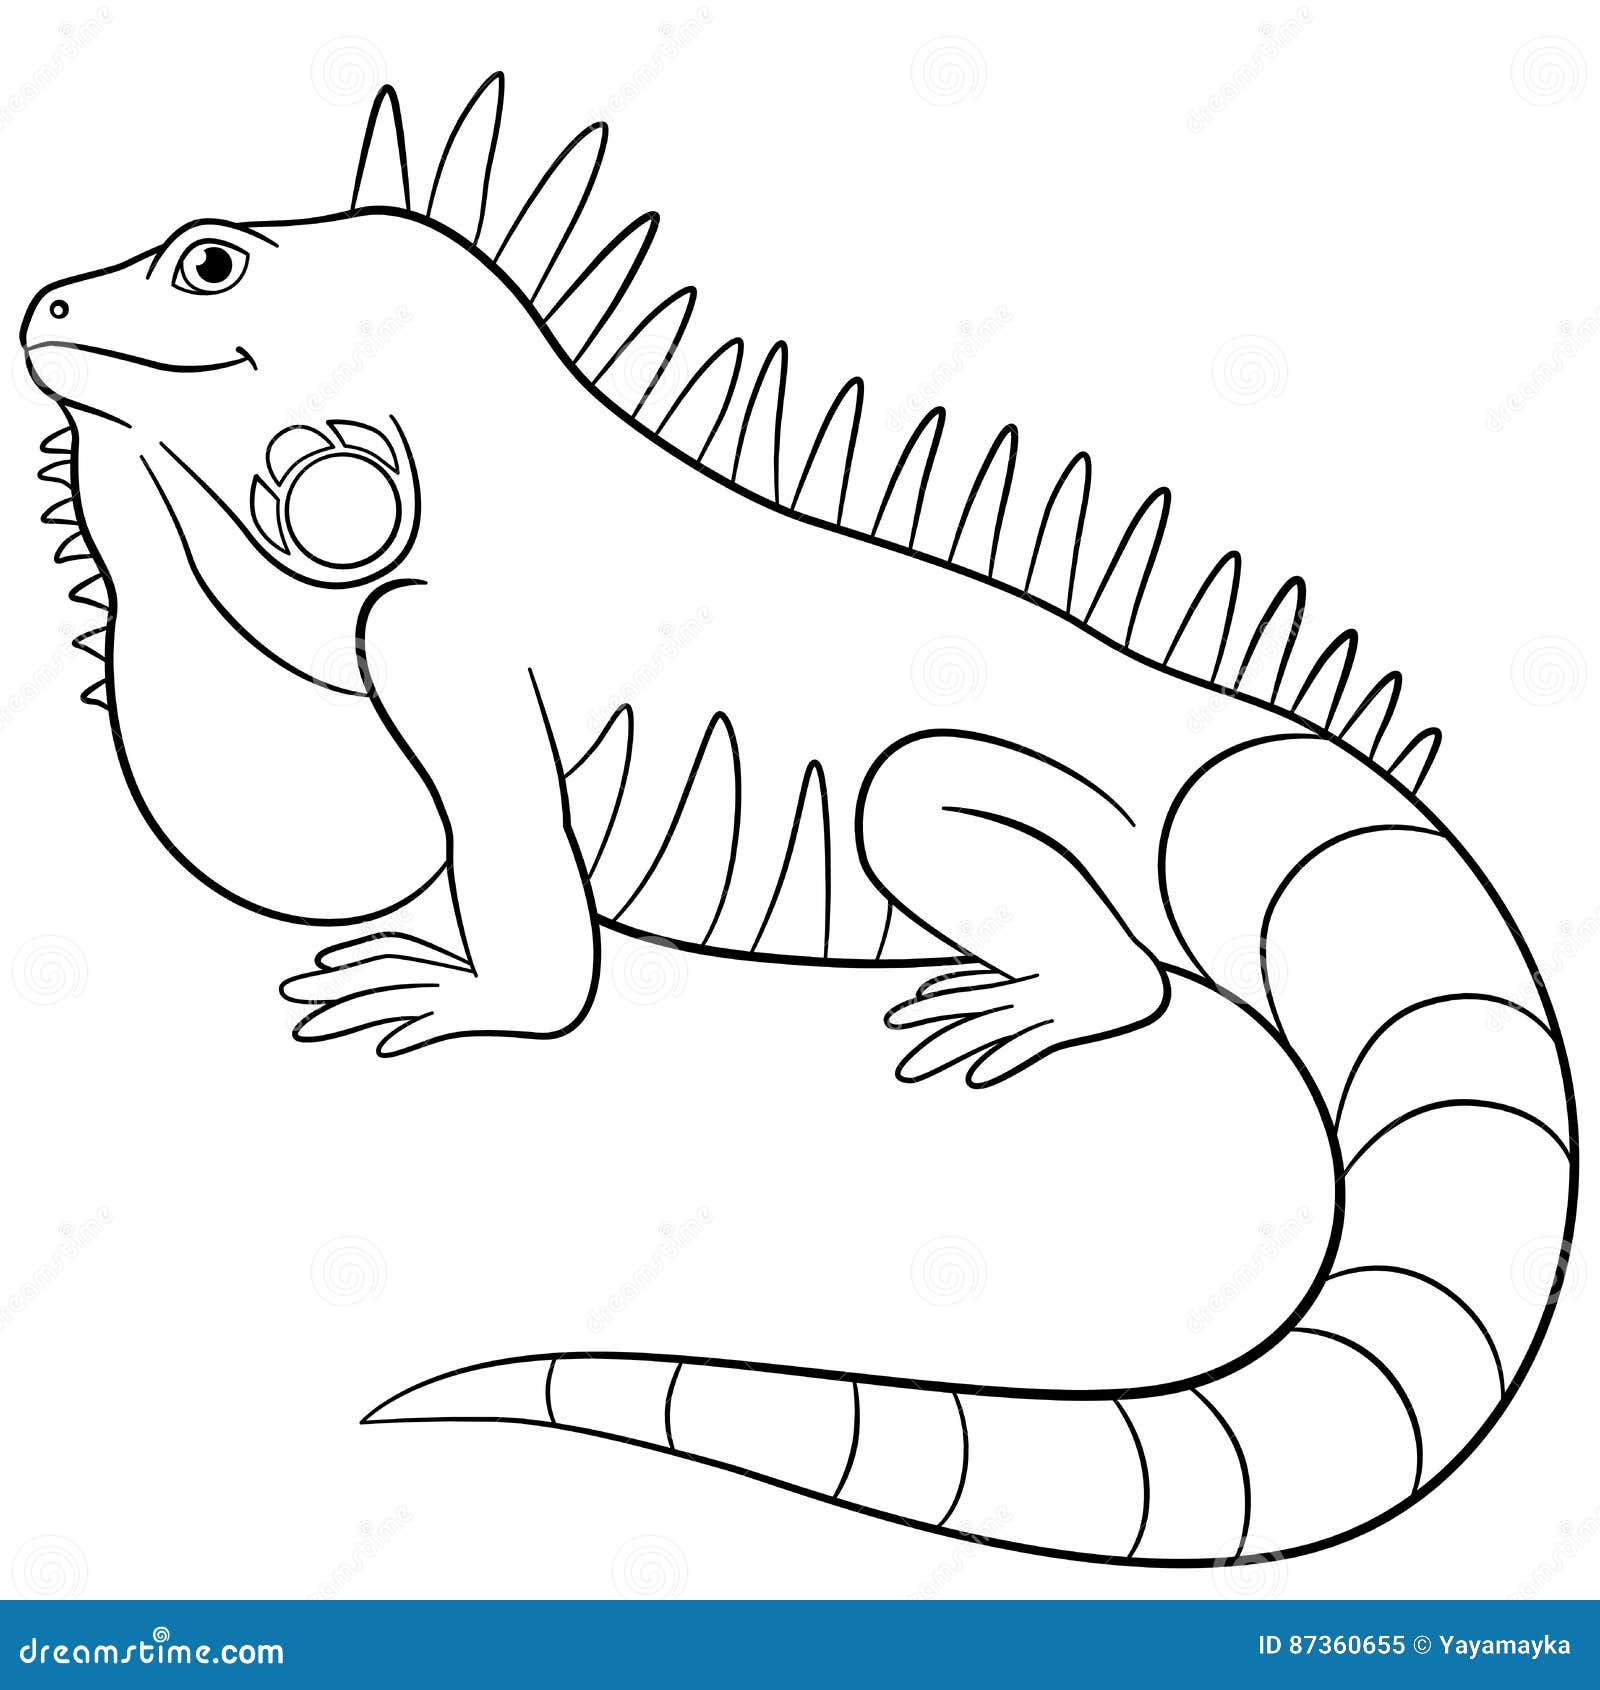 Download Coloring Pages. Cute Iguana Smiles. Stock Vector ...